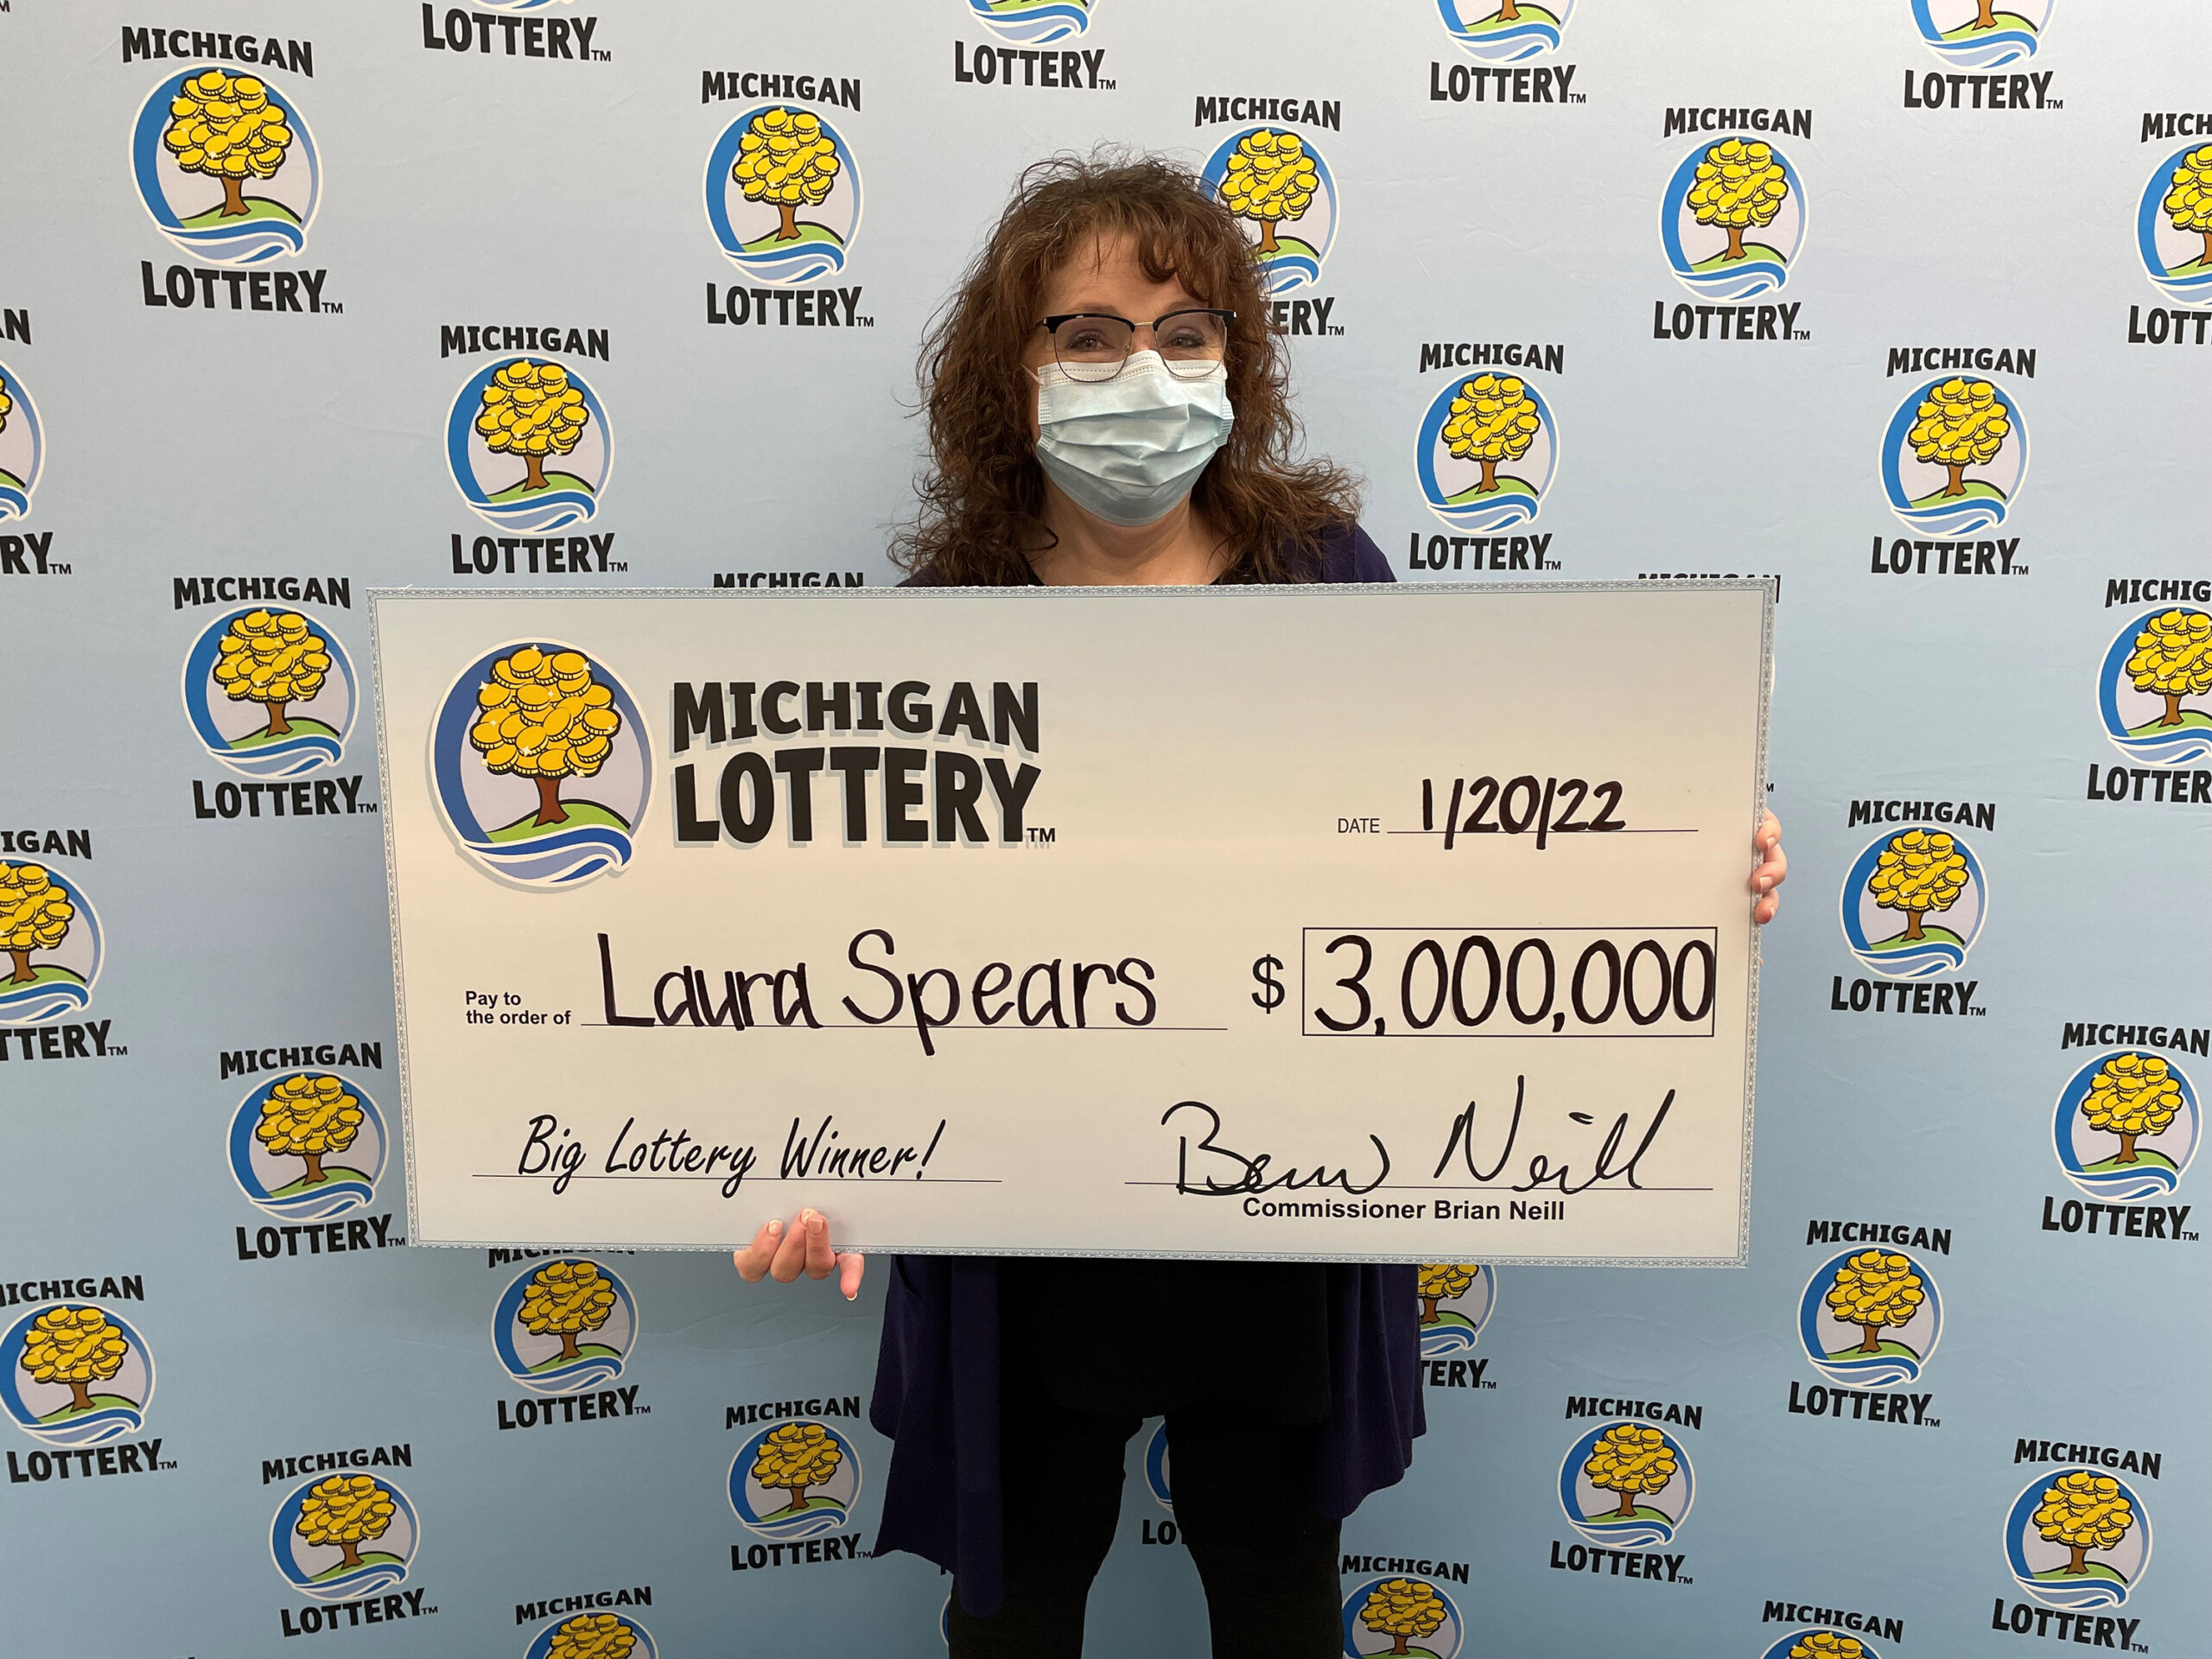 Laura Spears found a $3 million lottery win in her email spam folder.

Press release: https://milotteryconnect.com/2022/01/21/no-spam-here-oakland-county-woman-wins-3-million-mega-millions-prize/